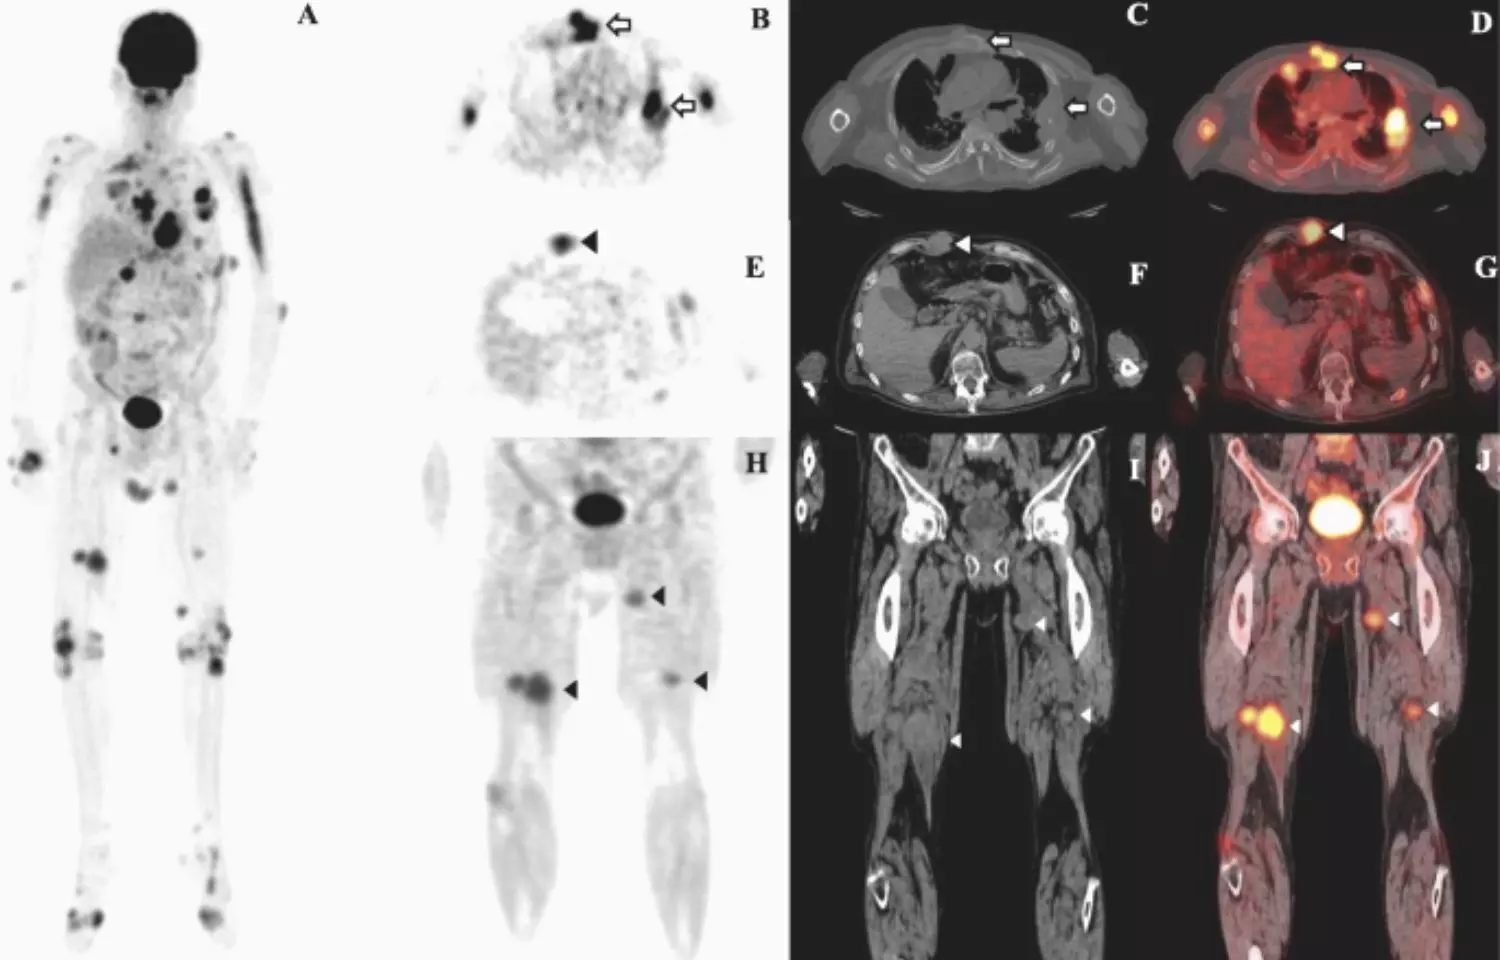 PET/CT helps assess early treatment response in multiple myeloma patients